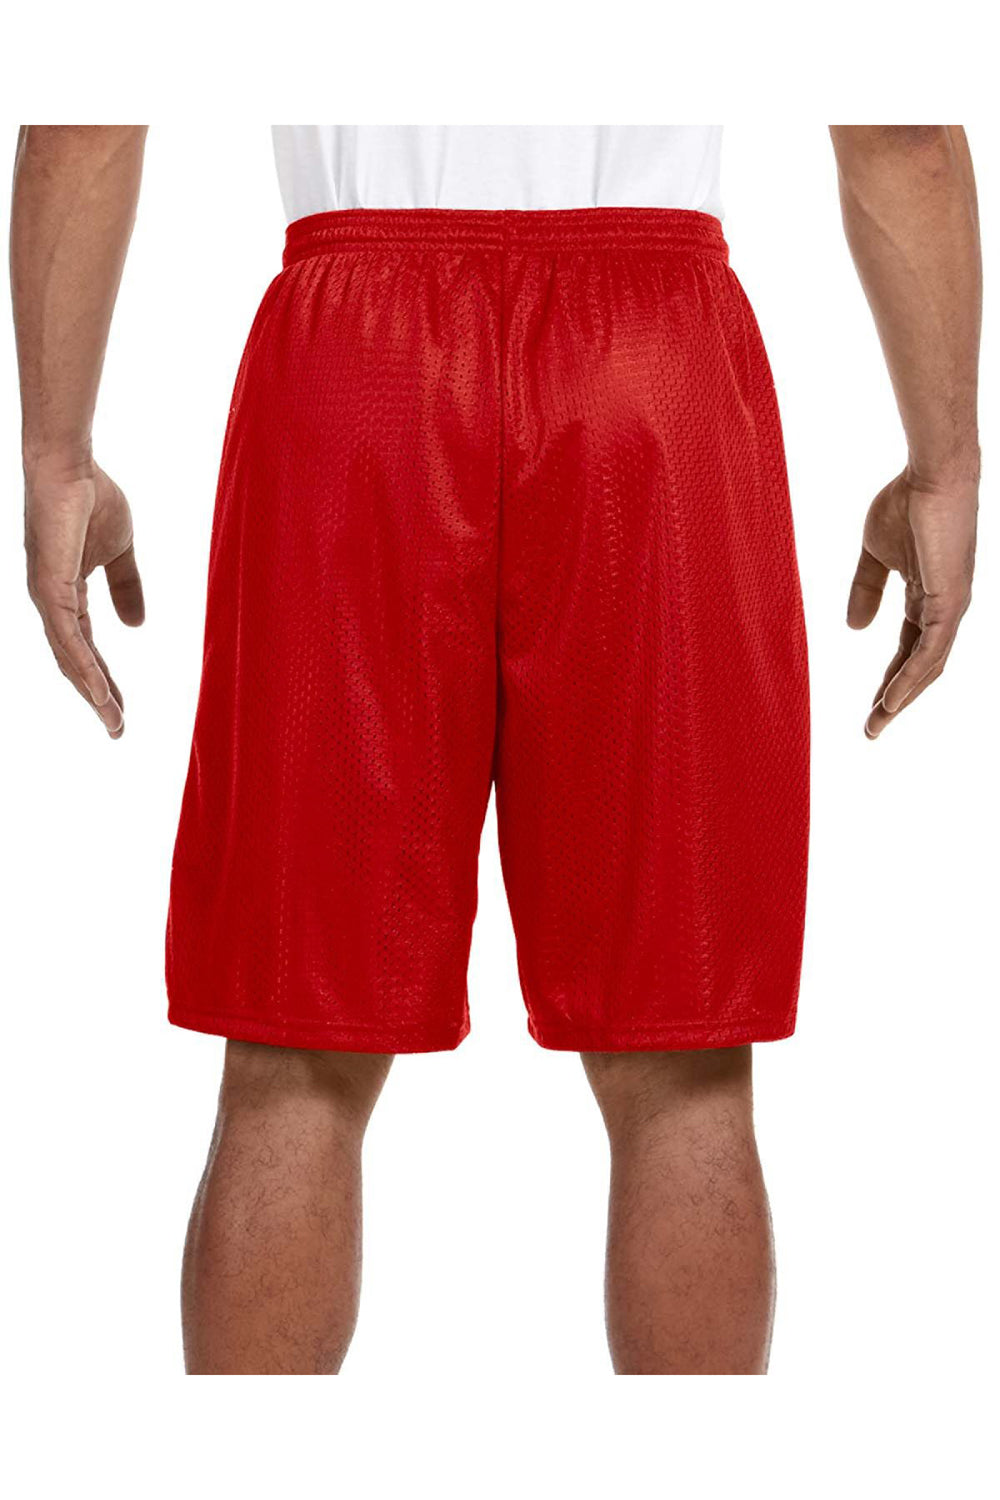 A4 N5296 Mens Moisture Wicking Tricot Mesh Shorts Scarlet Red Model Back